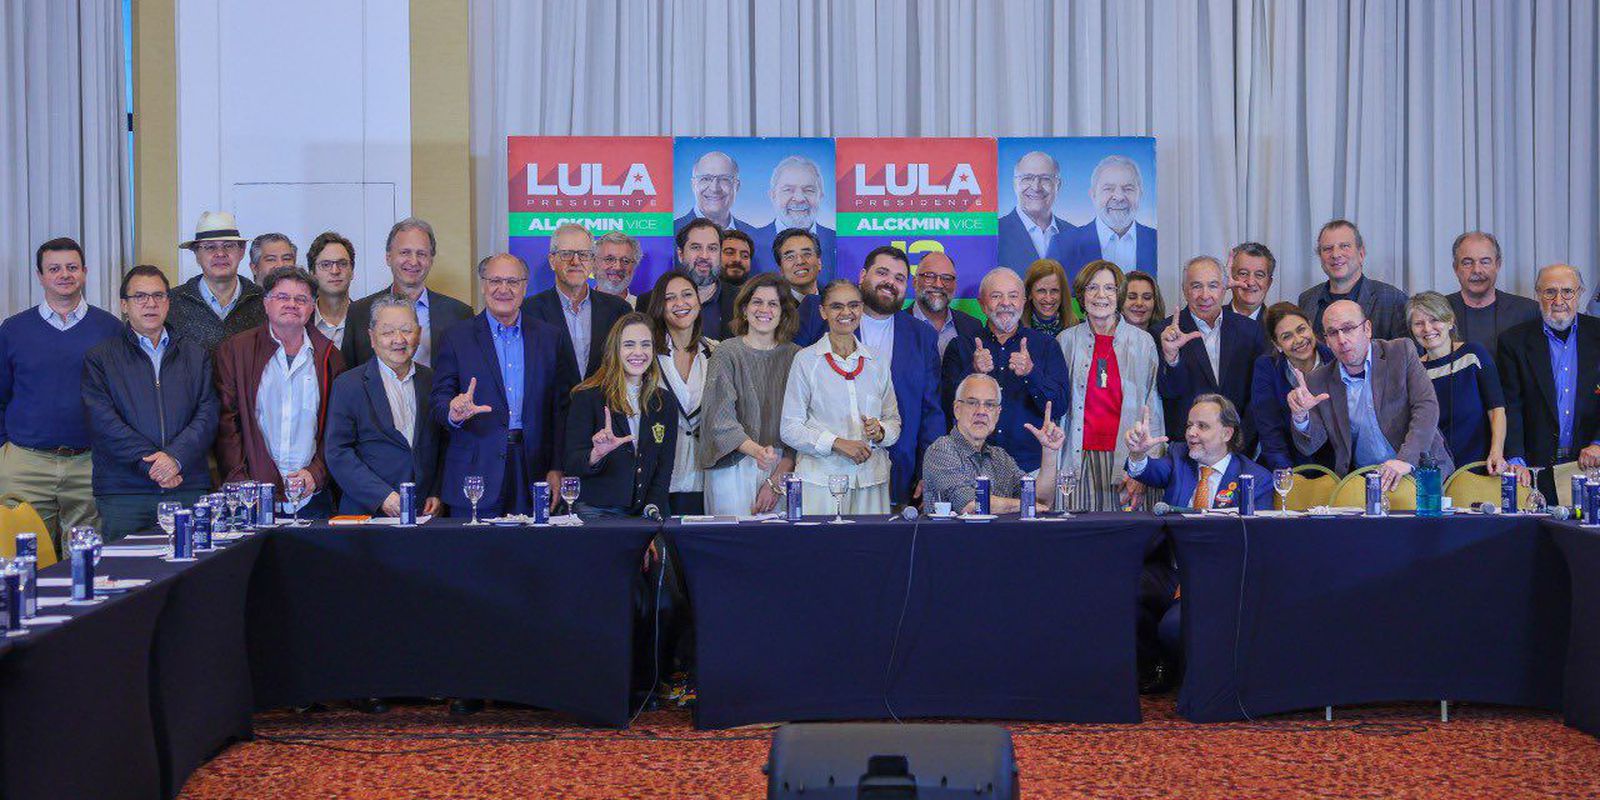 Lula receives support from civil society actors